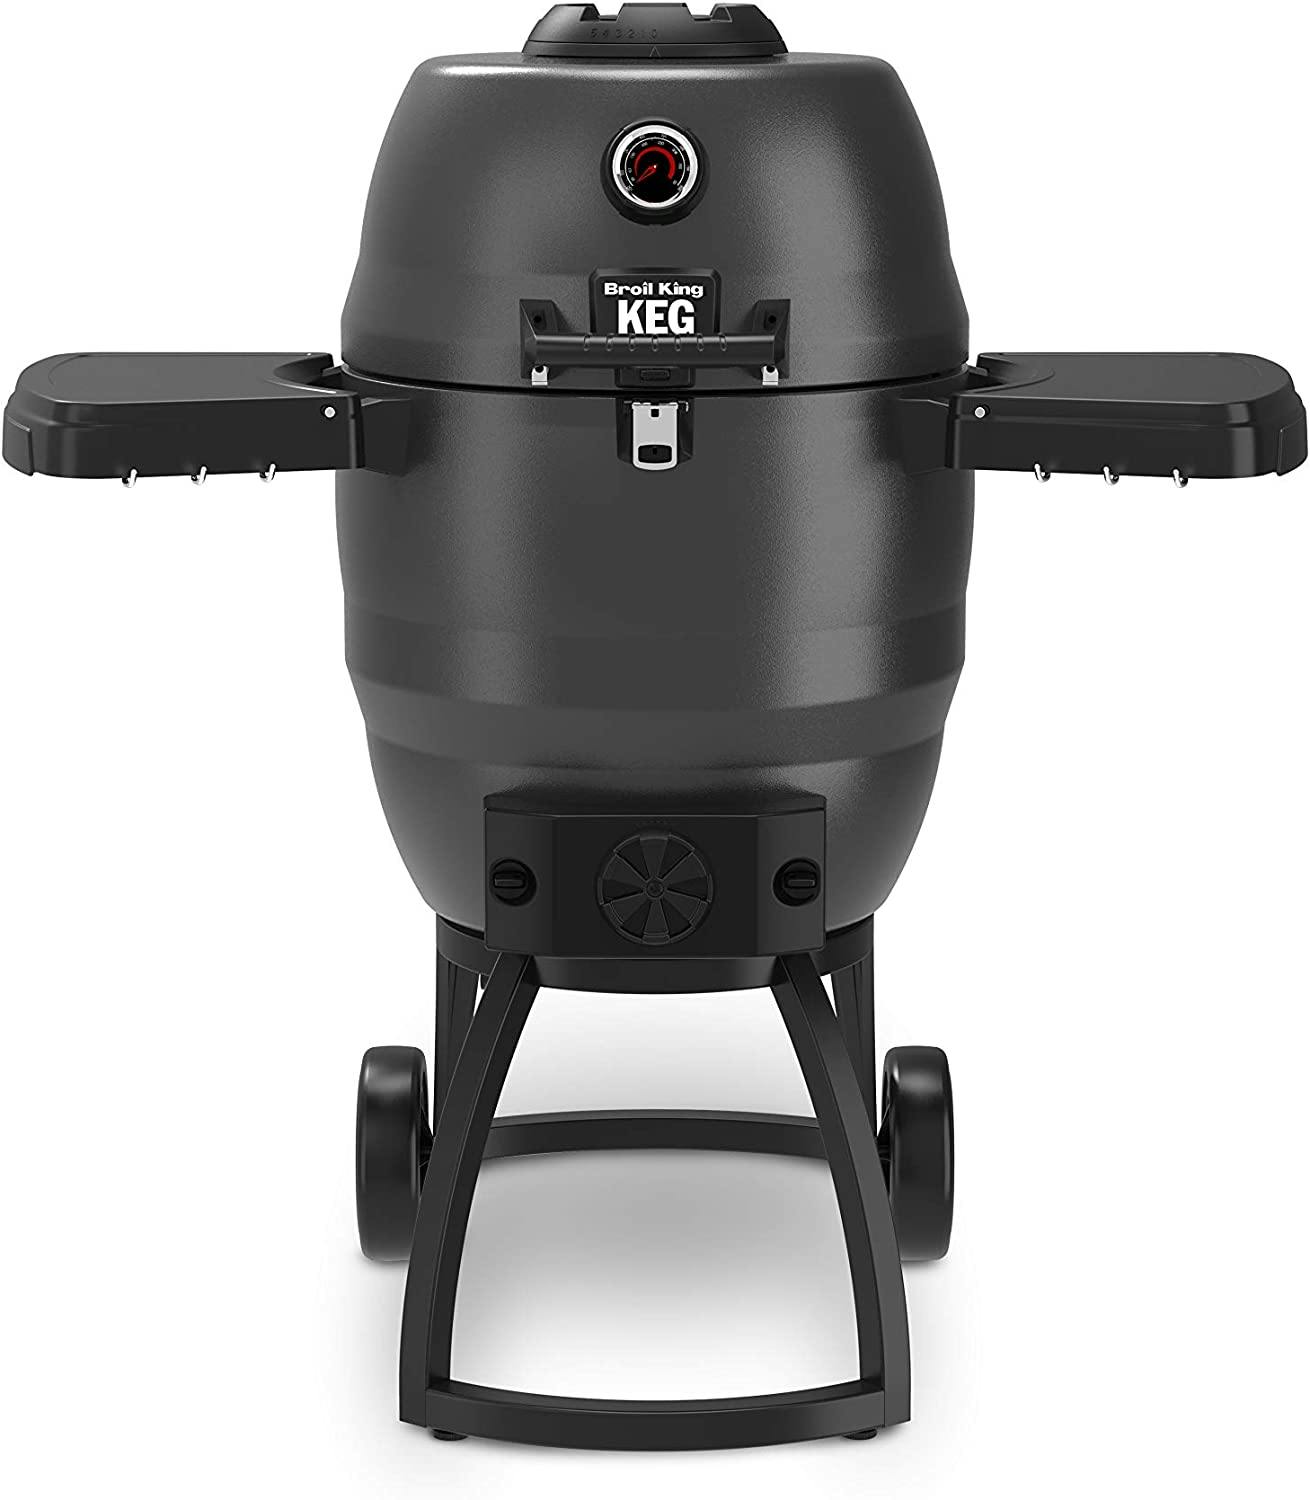 Broil King Keg 5000 Charcoal Grill · 19 in.